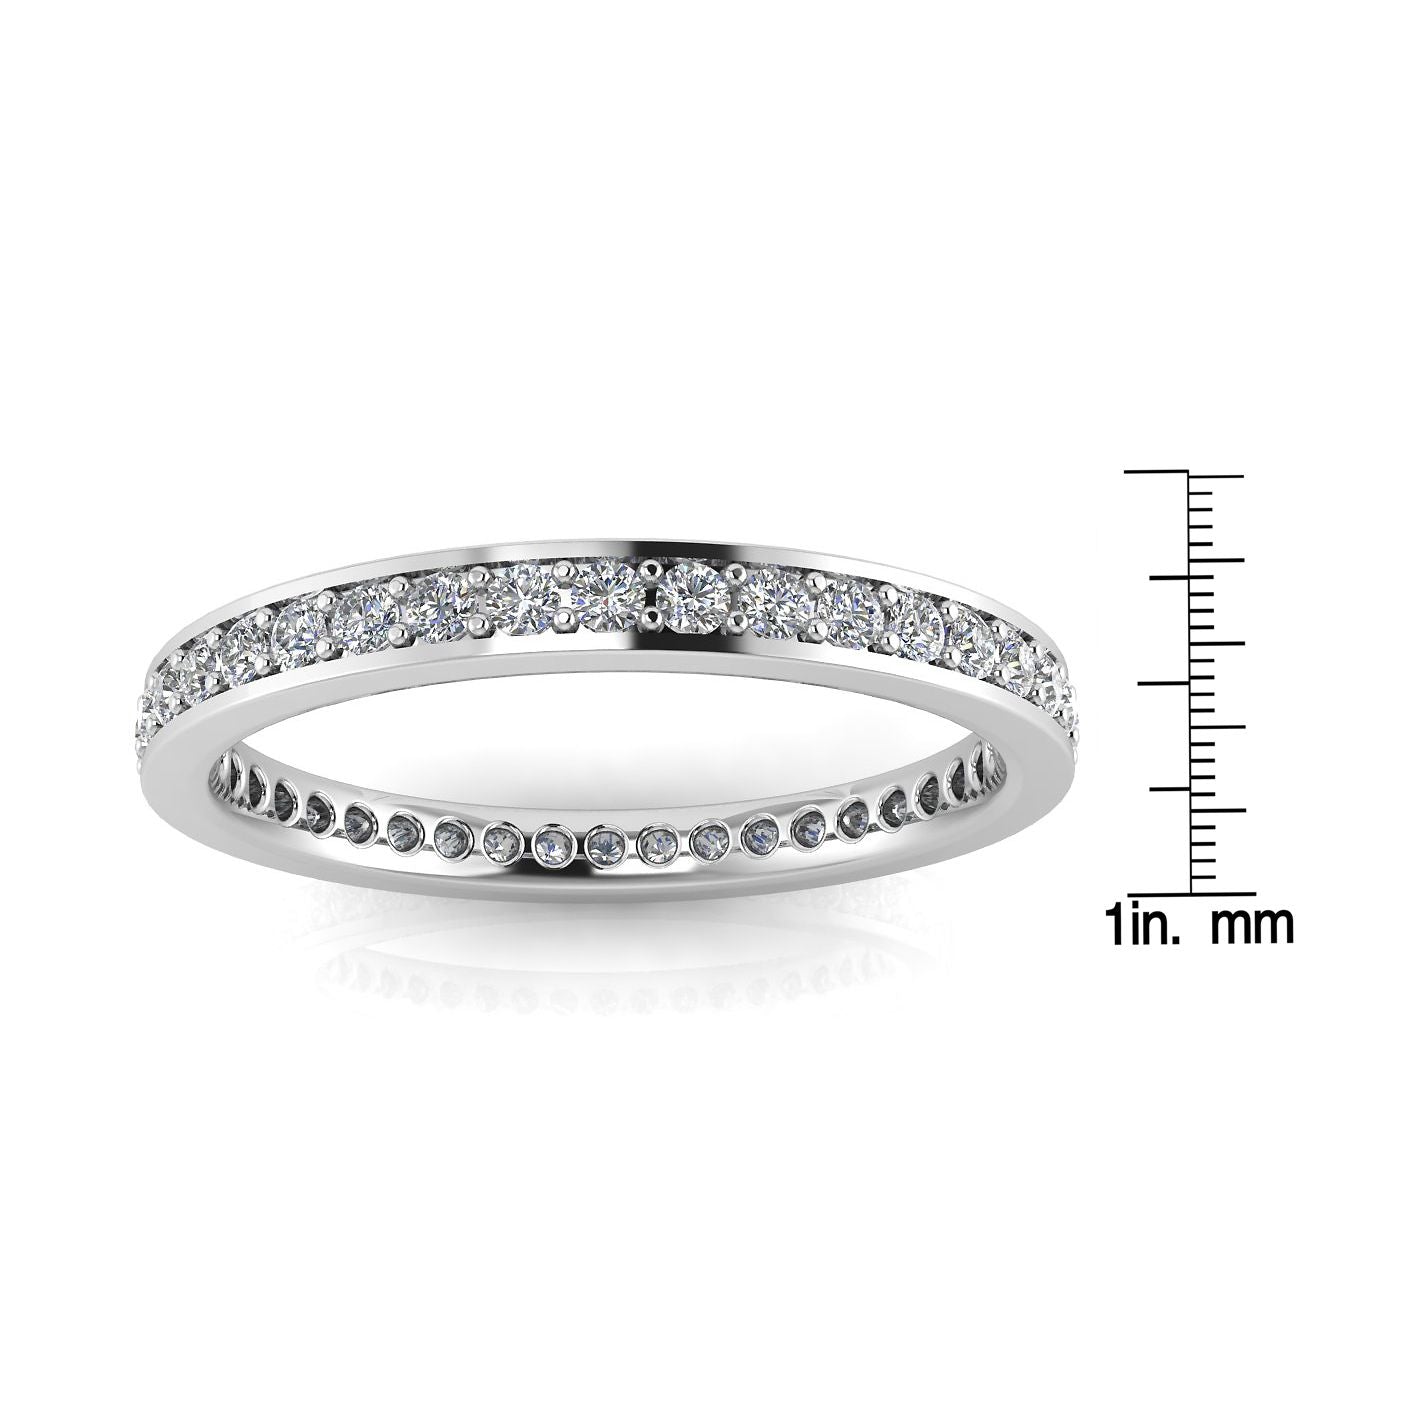 Round Brilliant Cut Diamond Channel Pave Set Eternity Ring In 14k White Gold  (0.3ct. Tw.) Ring Size 5